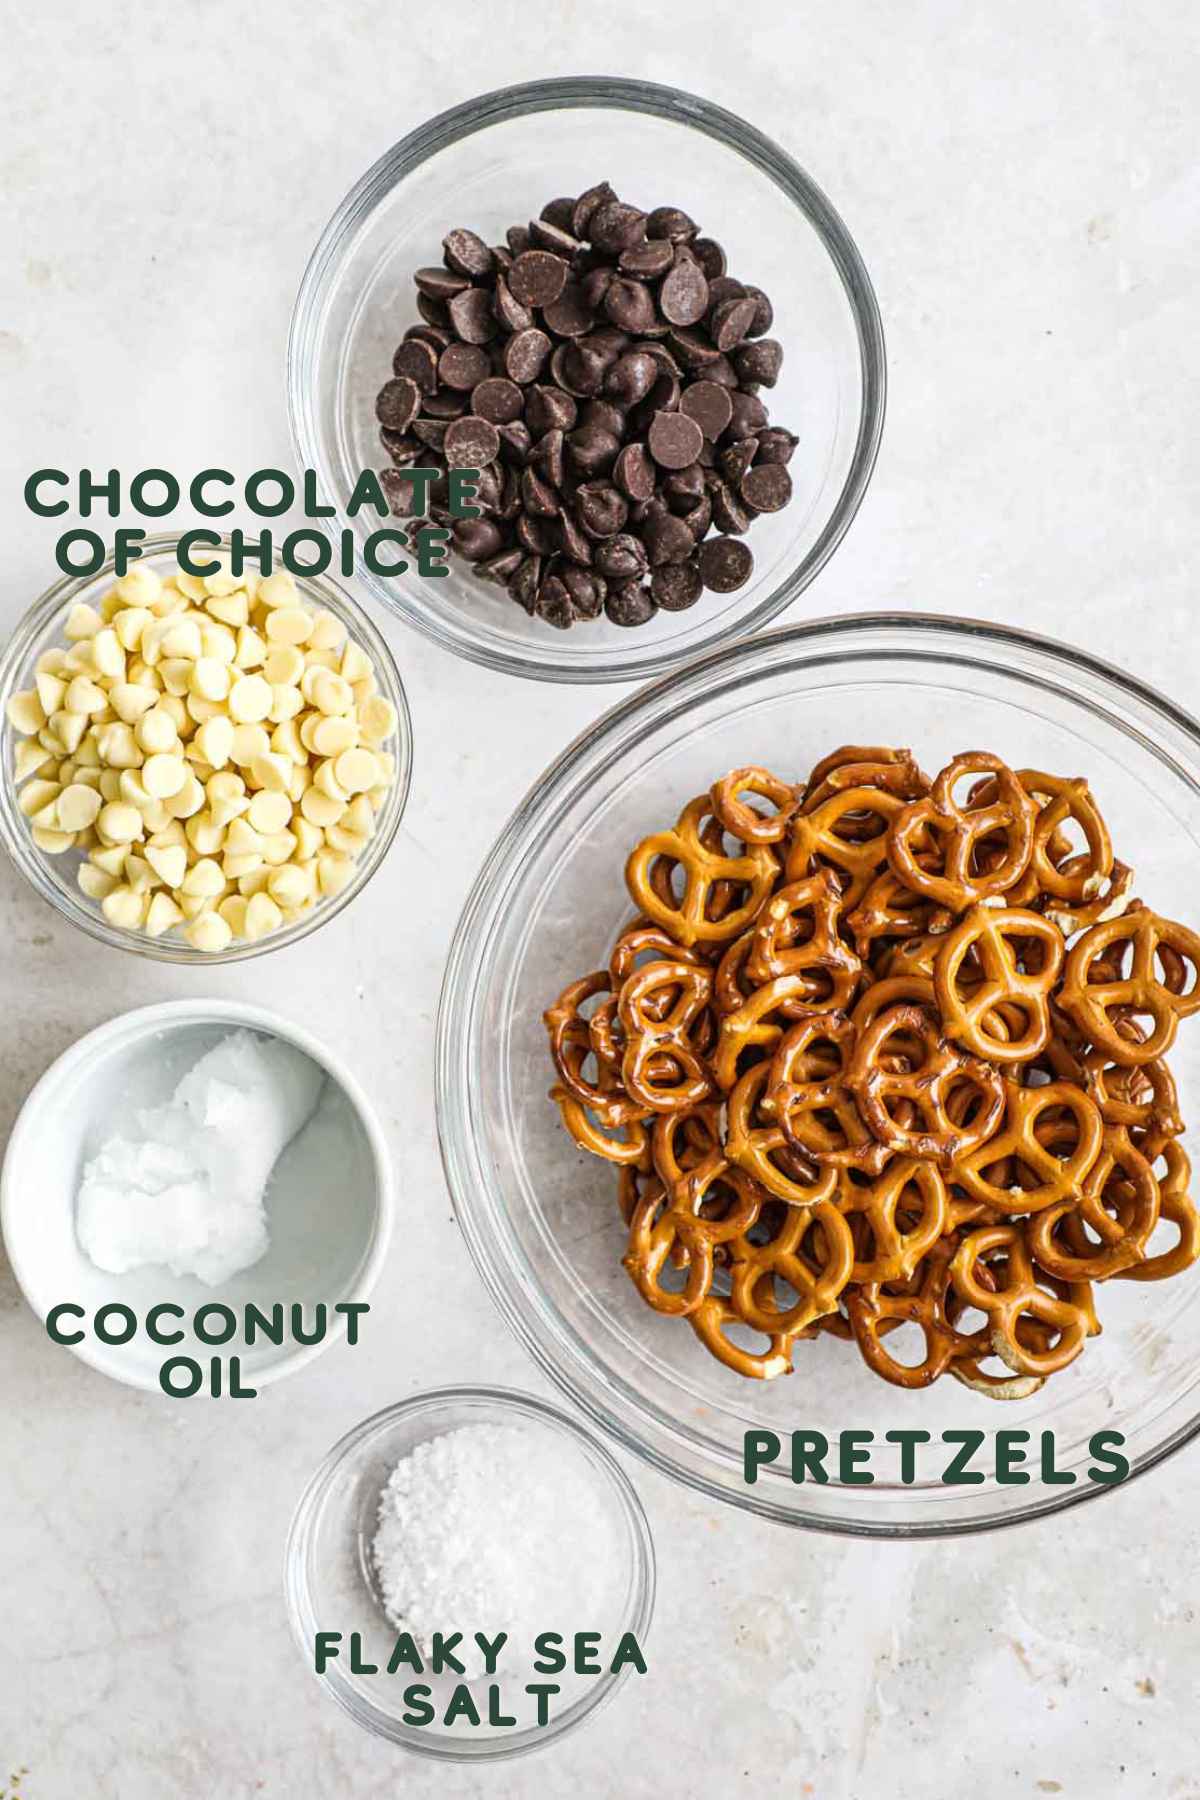 Ingredients to make chocolate-covered pretzels, including white or semi-sweet chocolate, coconut oil, flaky sea salt, and pretzels.